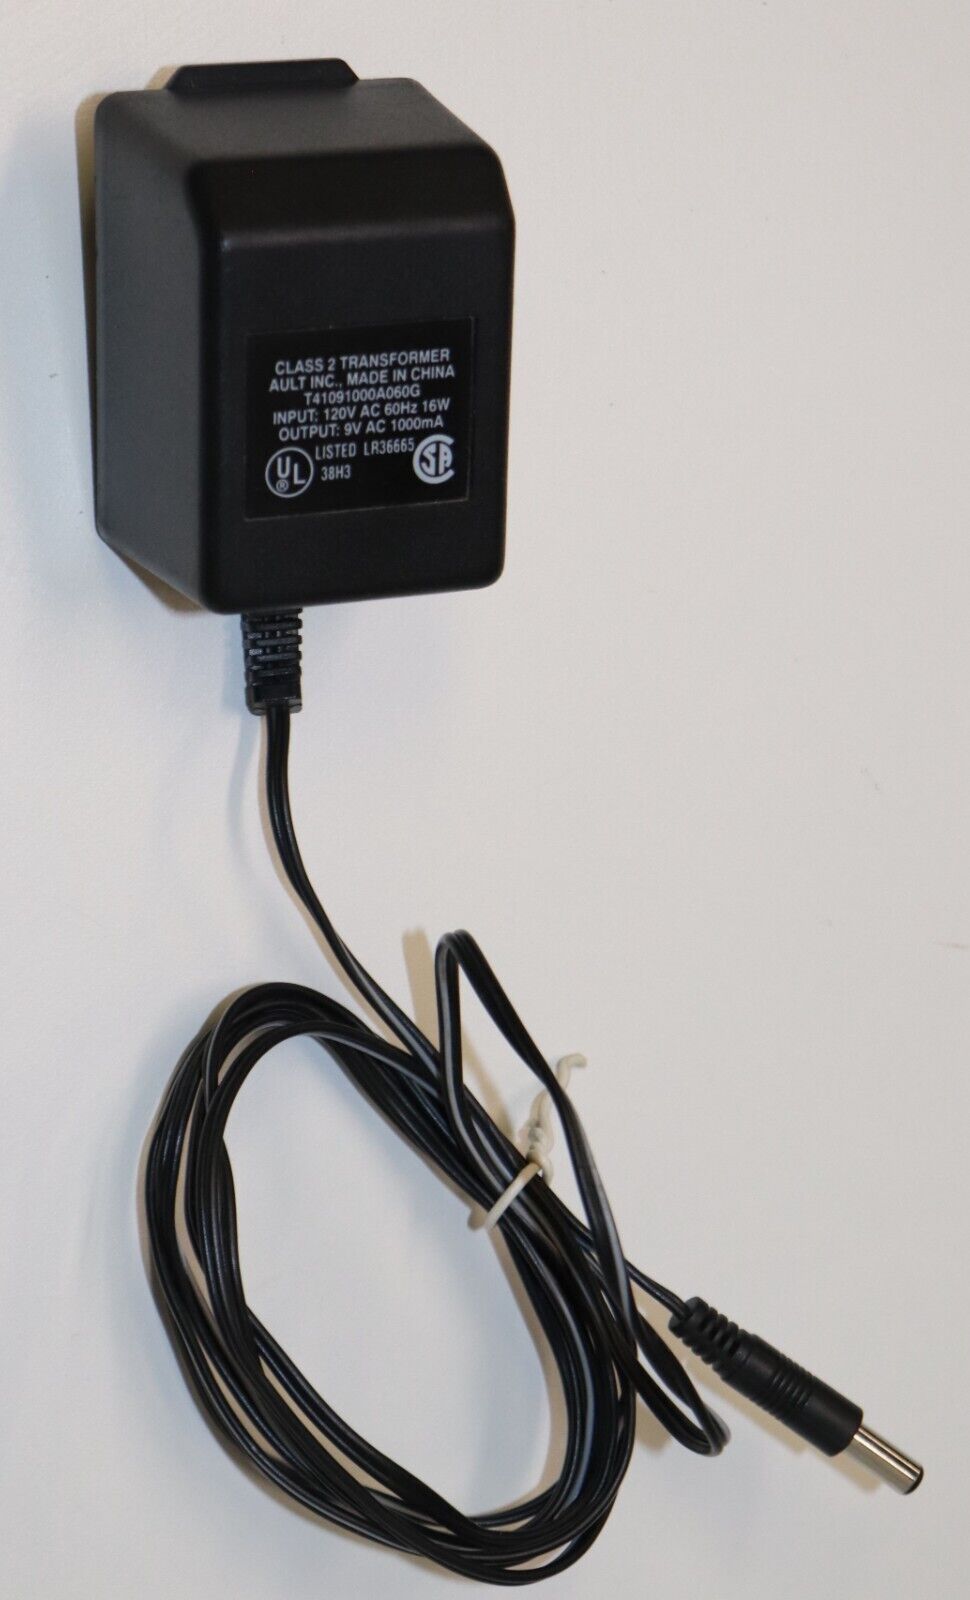 *Brand NEW* AULT 9VAC 1000mA AC Adapter T41091000A060G Class 2 Power Supply - Click Image to Close